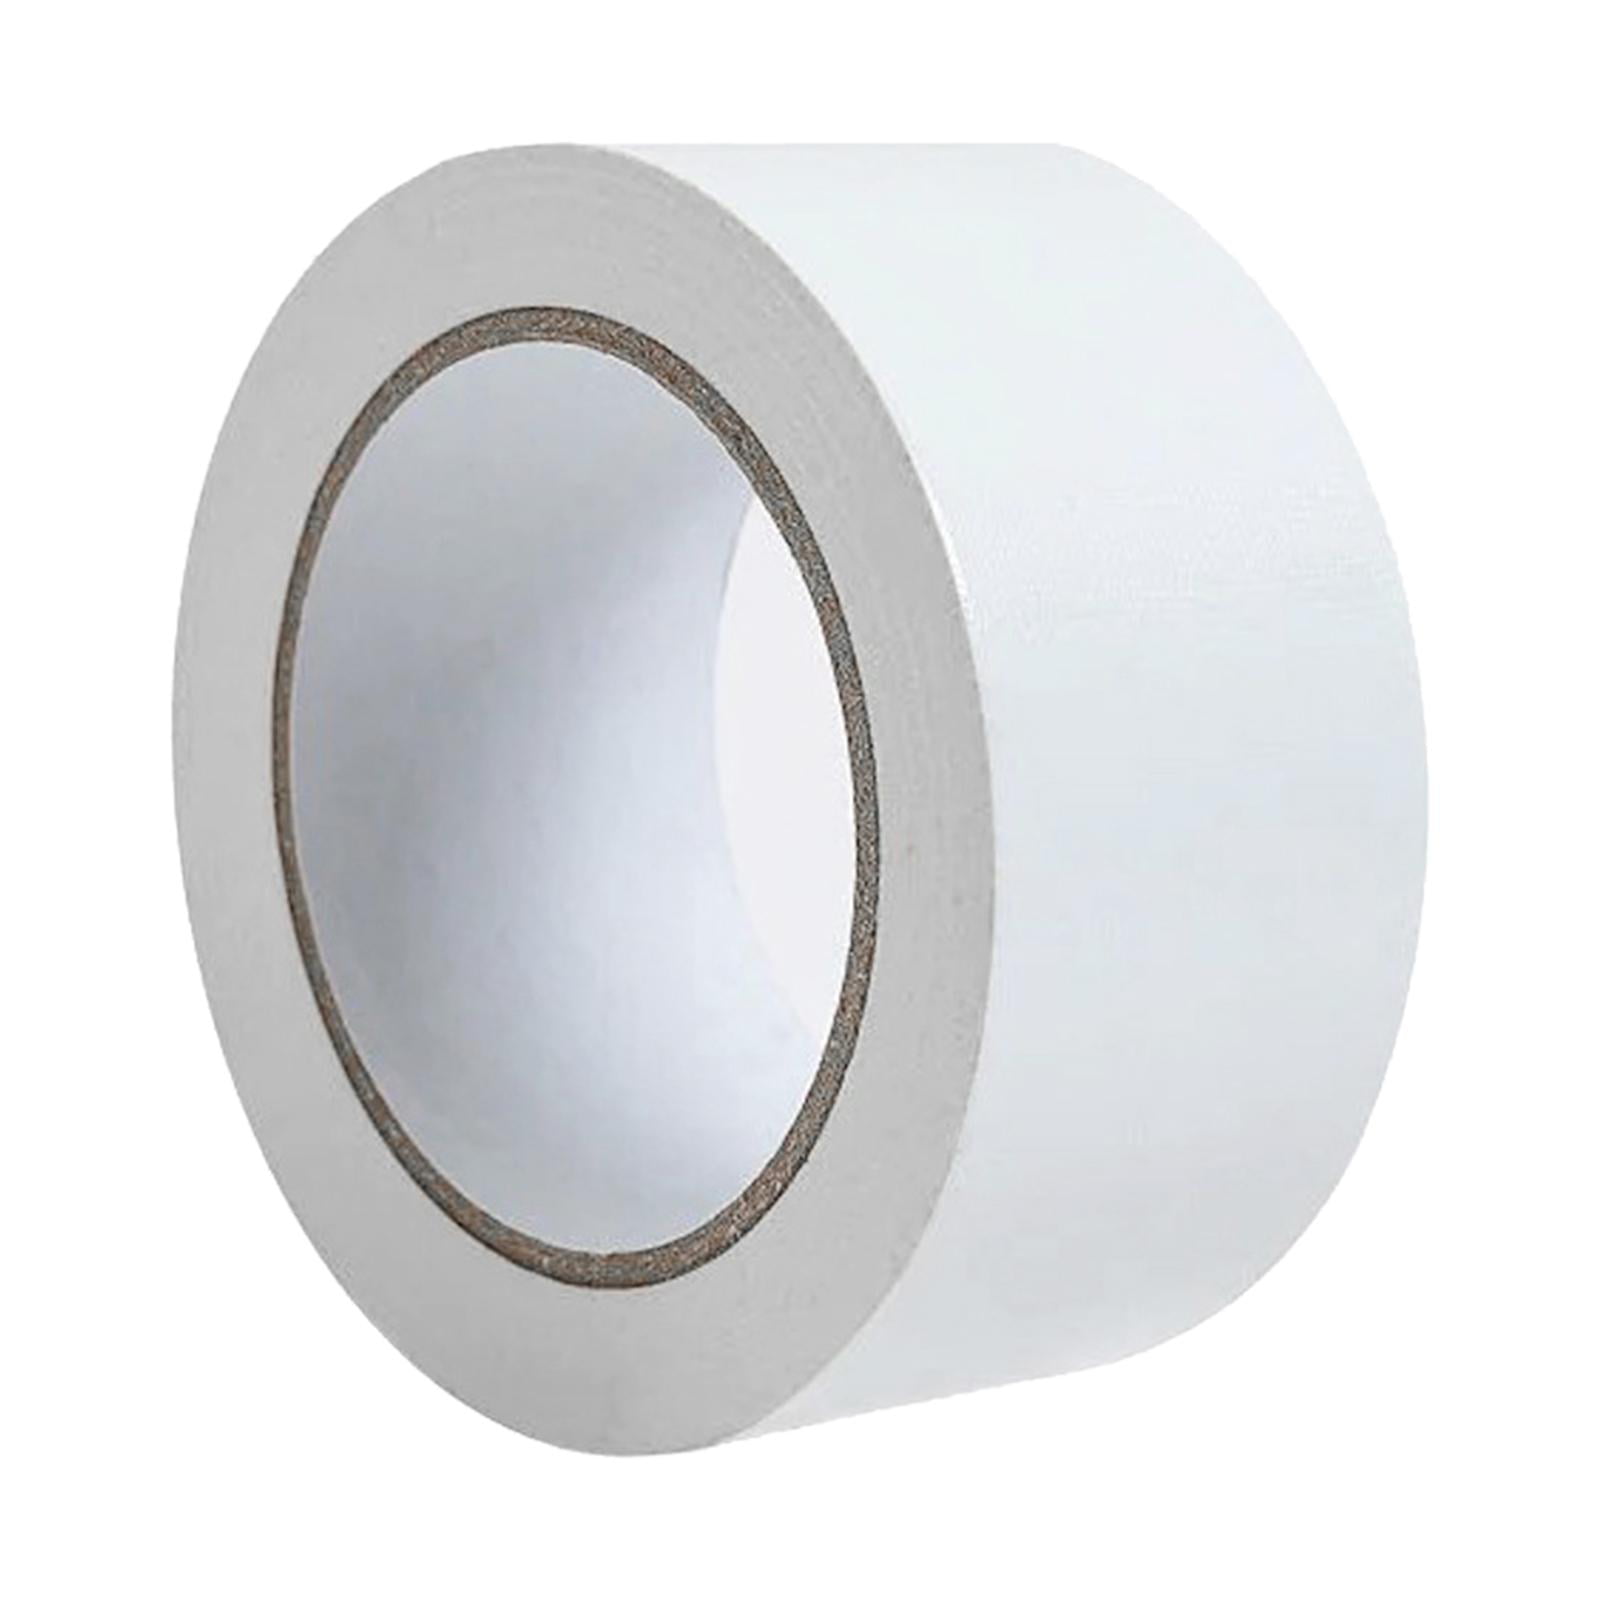 fowong Window Weather Stripping Tape, White Window Insulation for Winter  Door Draft Sealing Film Tape, No Residue, Removes Cleanly, 2-Inch x 32 Yards